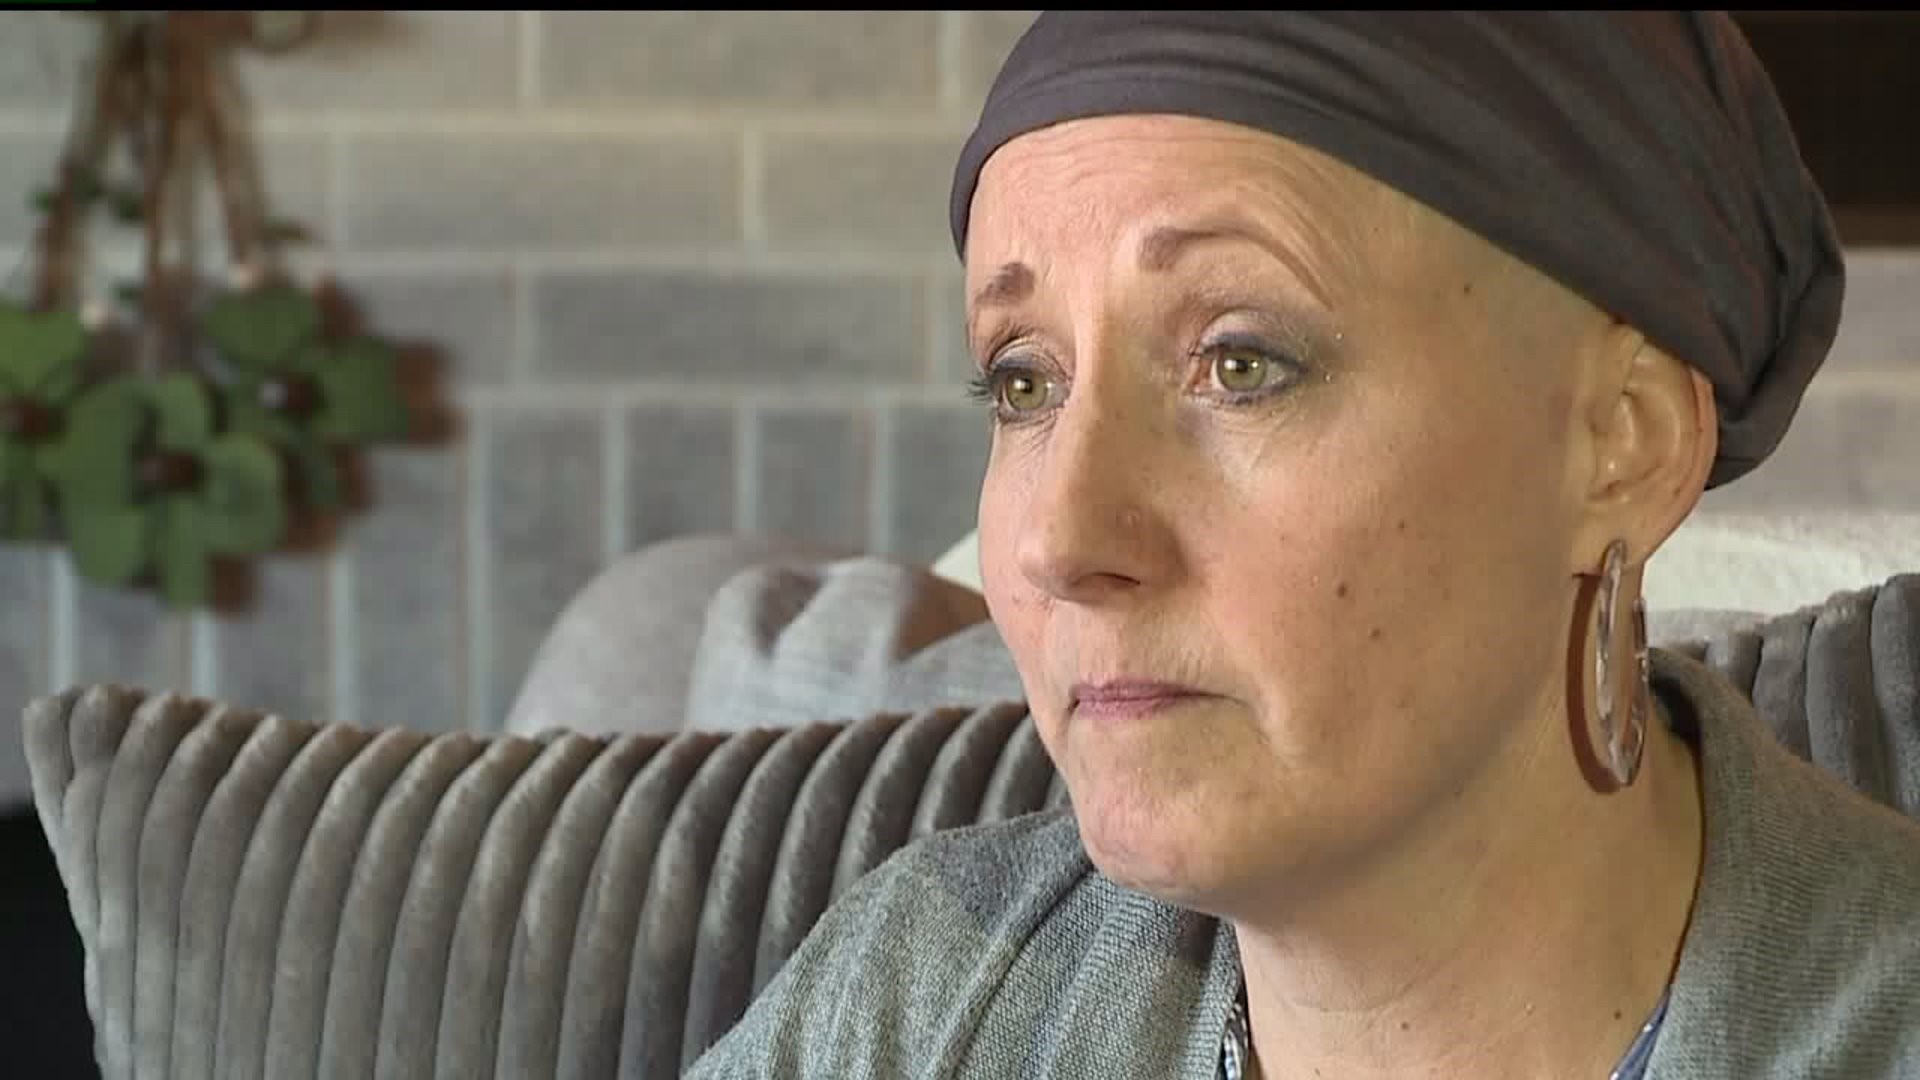 FOX43 Finds Out: Getting Less Pay During Cancer Treatment